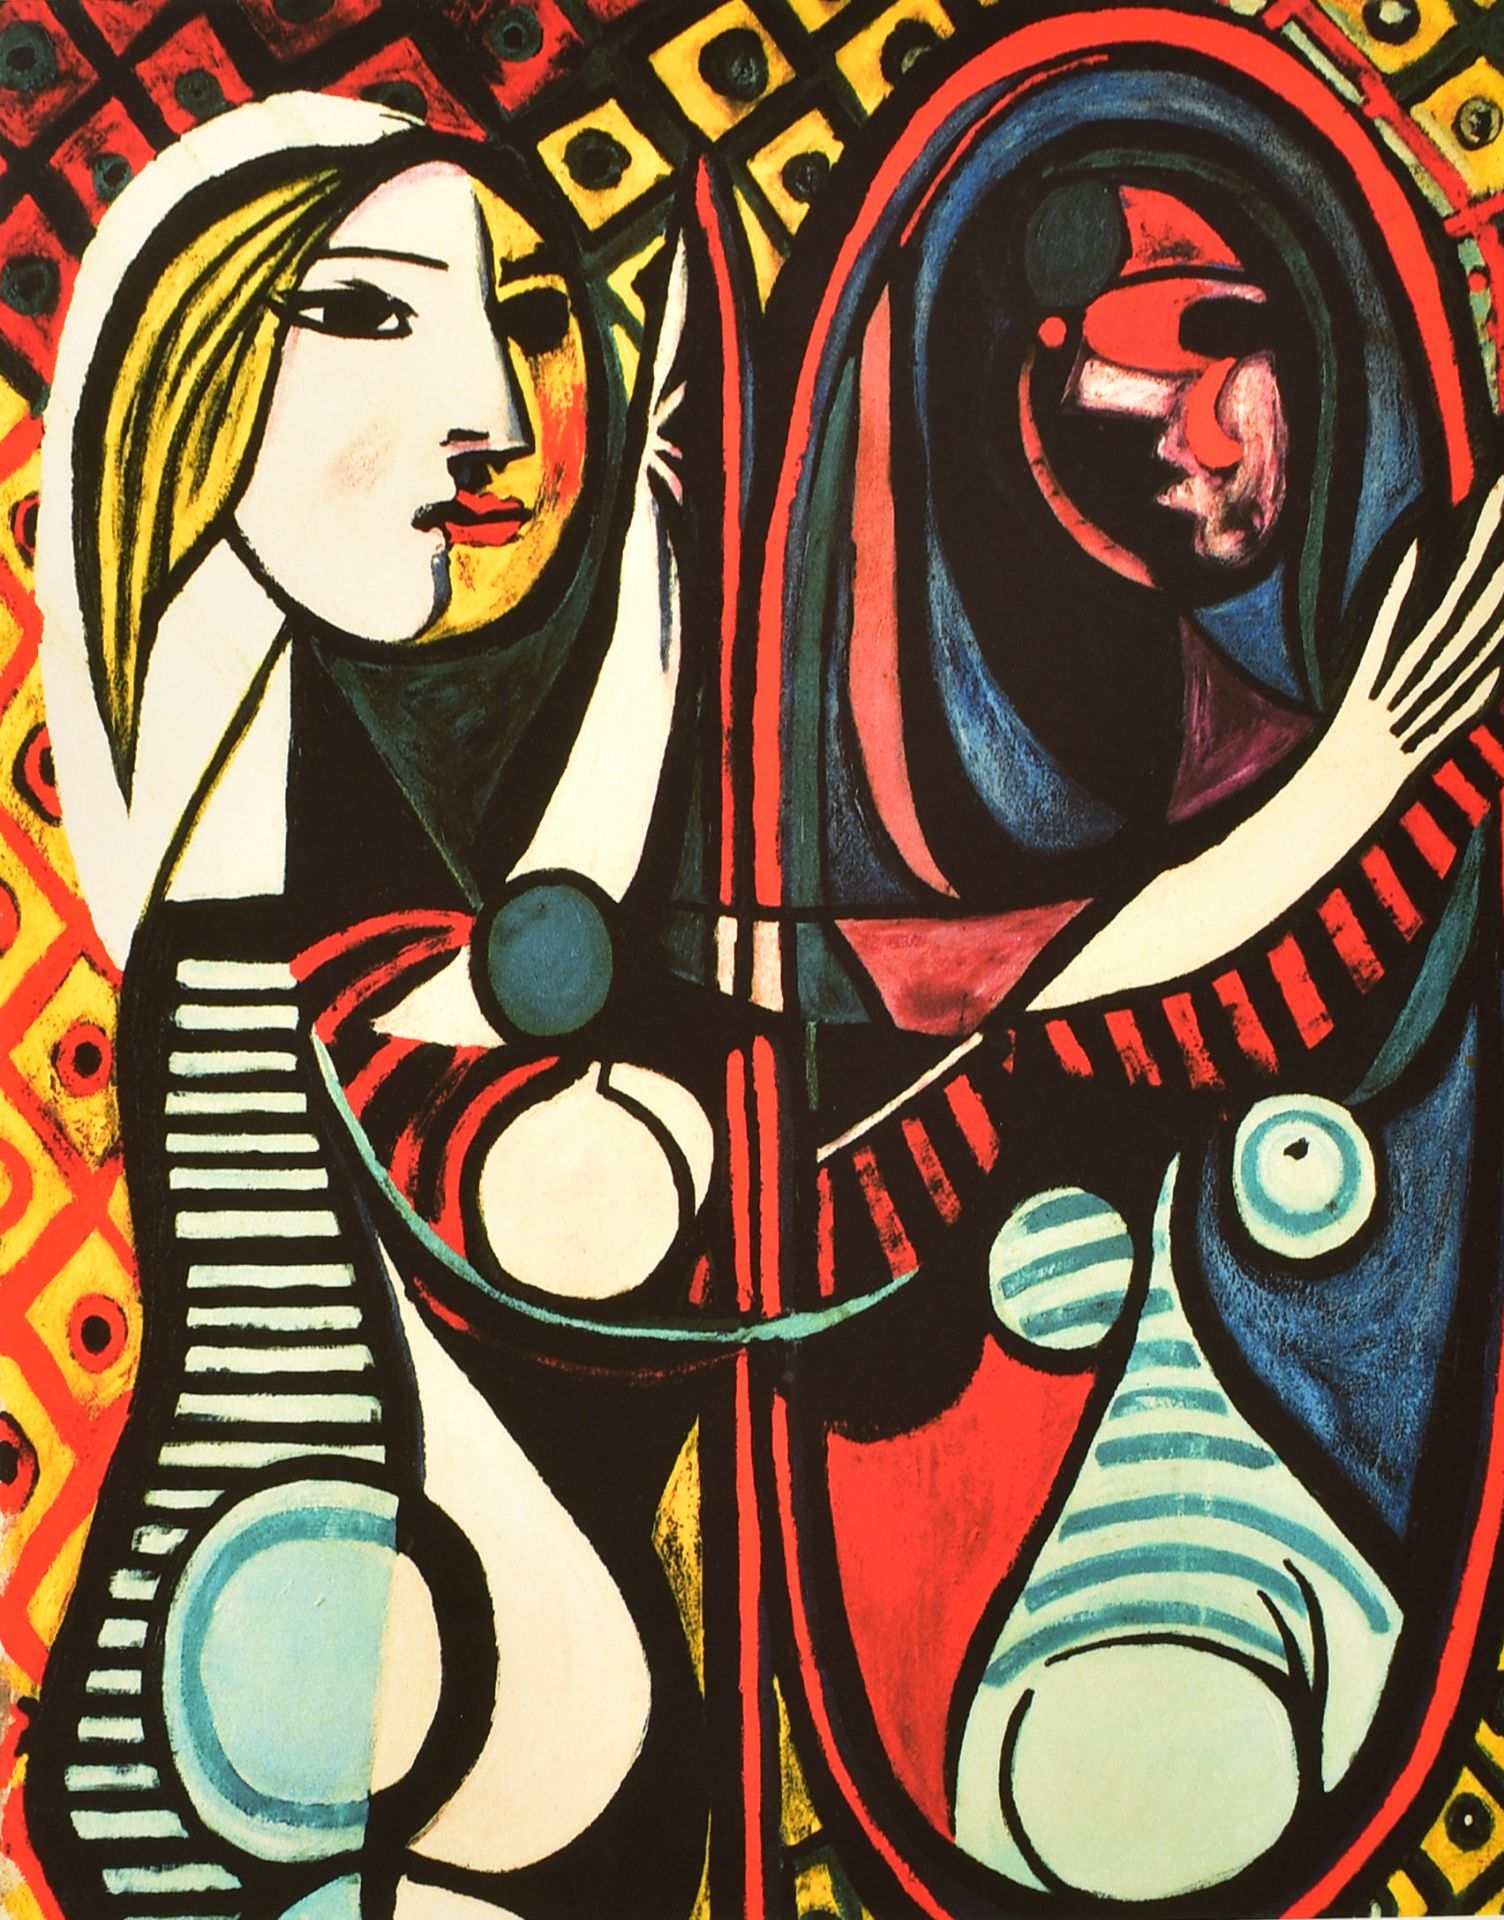 PABLO PICASSO (1881-1973) - GIRL BEFORE A MIRROR - 1932